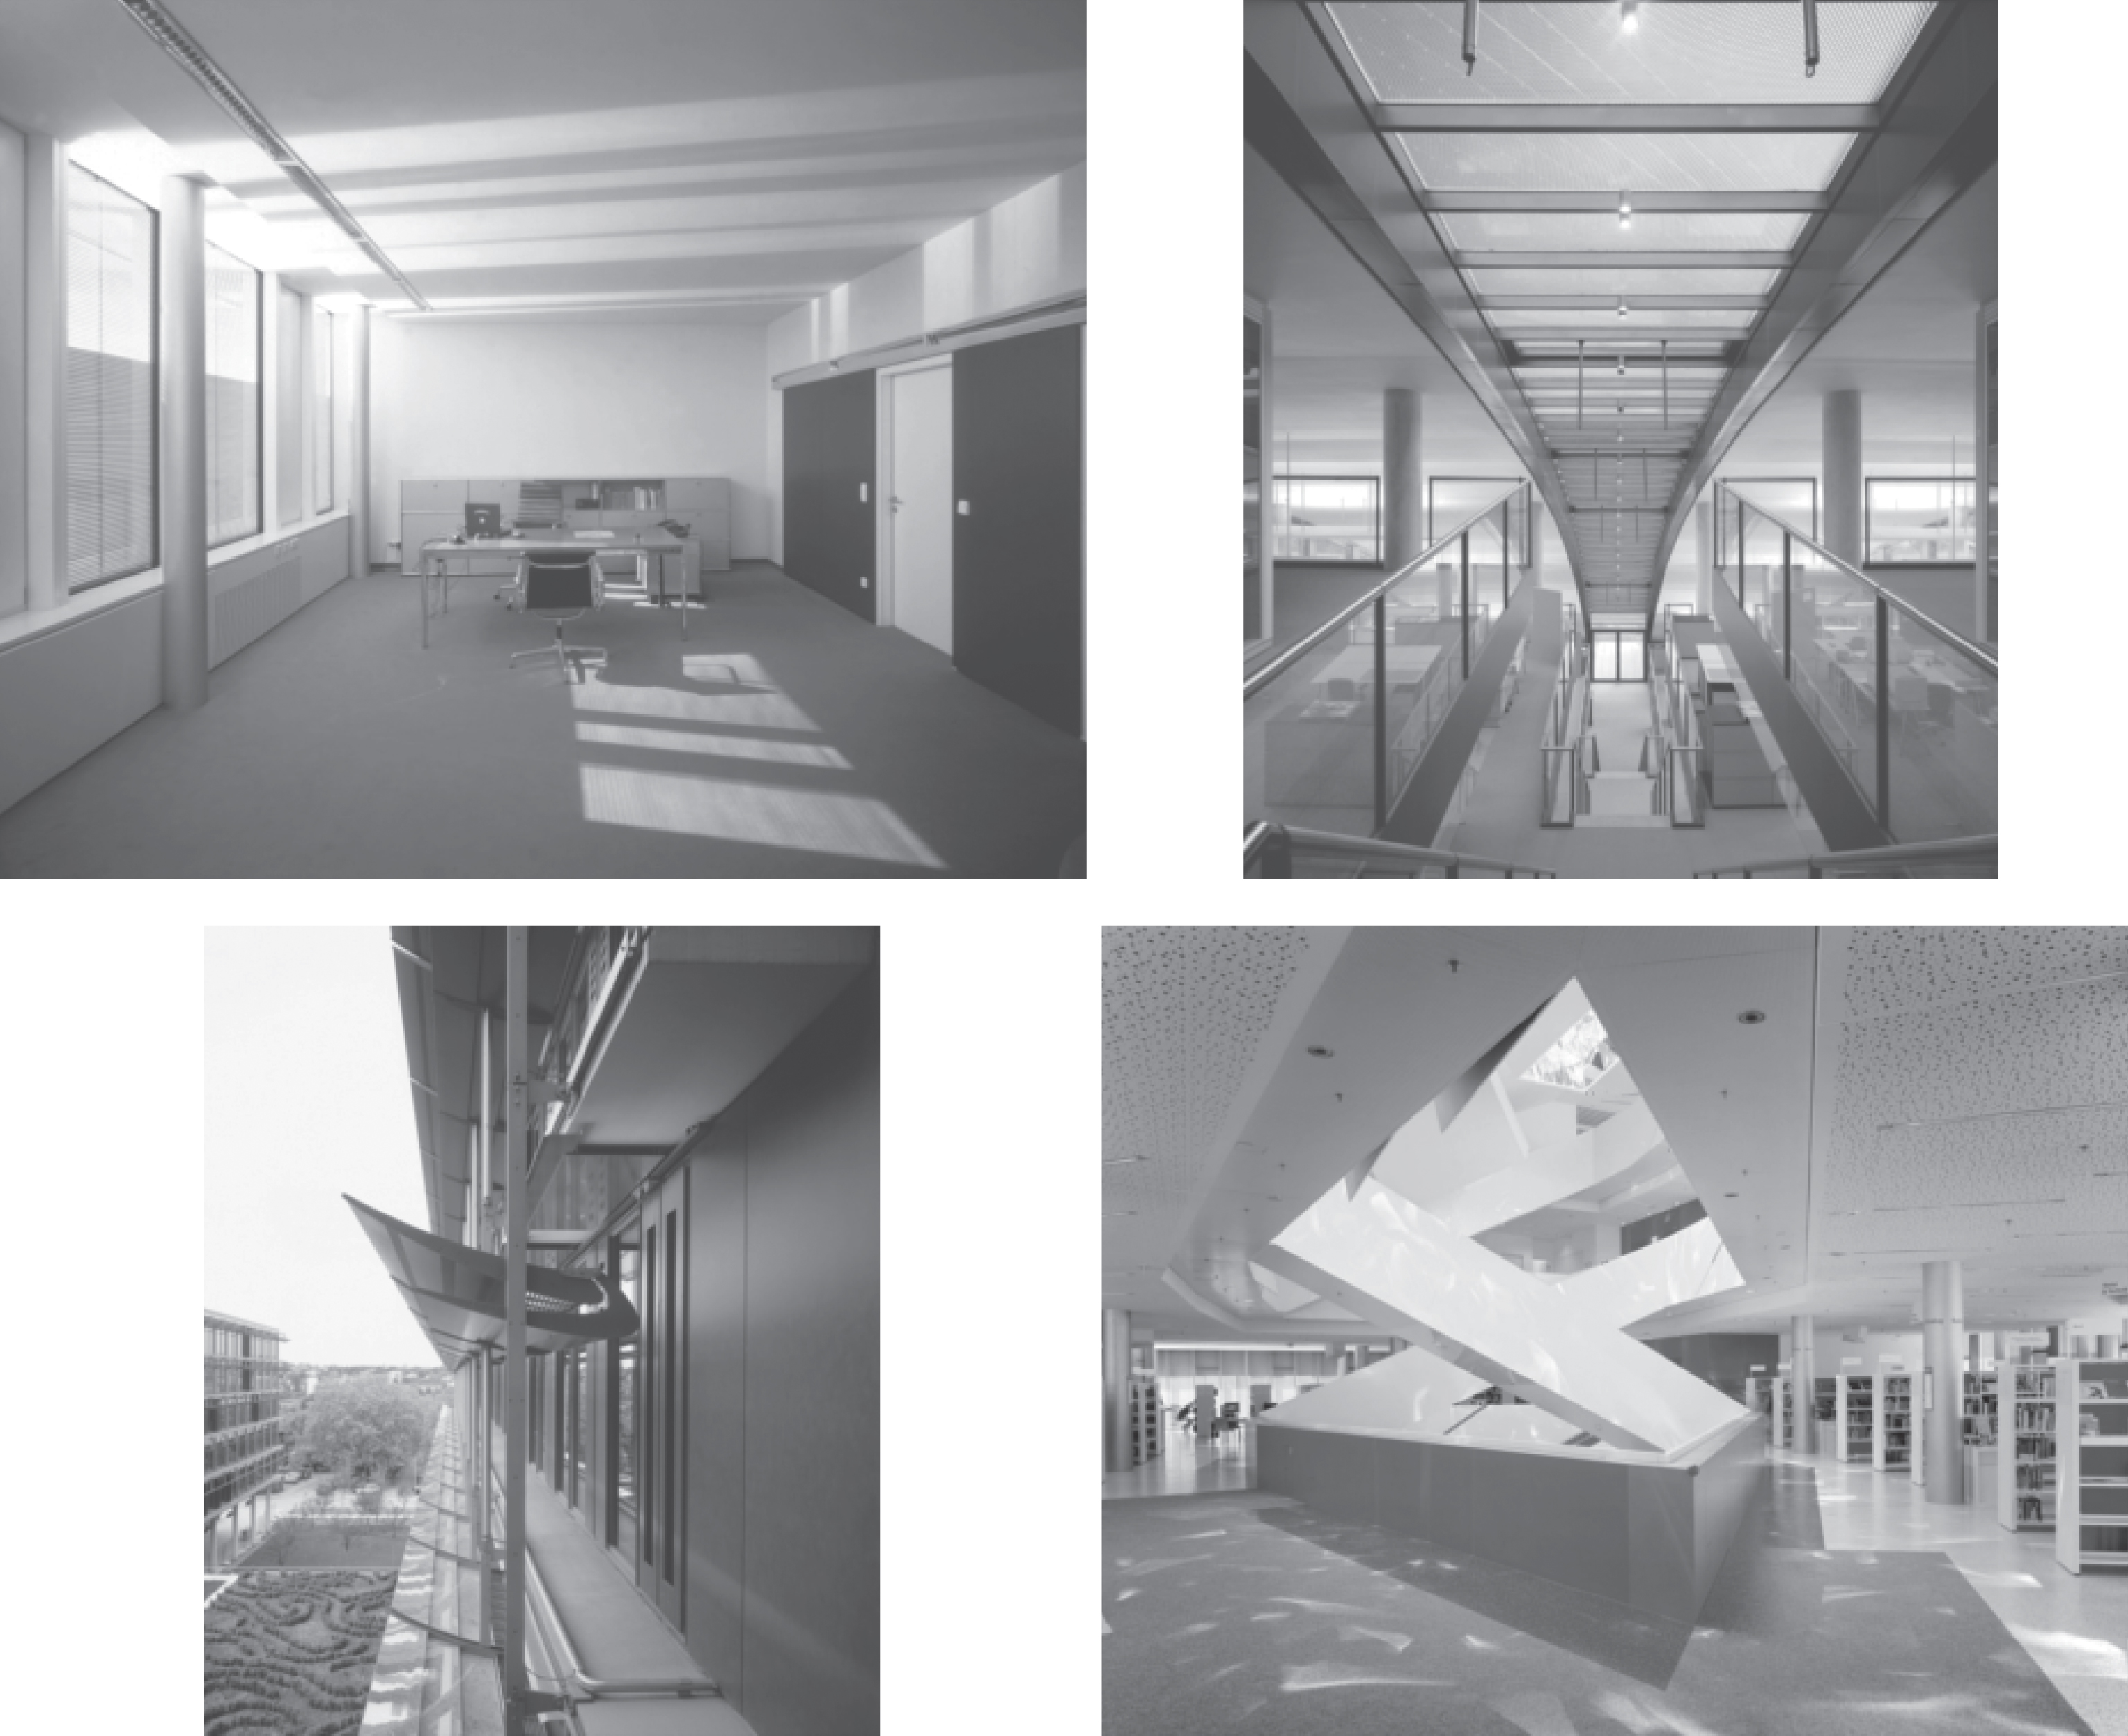 Examples of DRCs and DRC installations. Top left: Interior daylight distribution generated from a functional DRC made of curved specular lamellae integrated into a double glazed window. Top right: Skylight sections of a larger office building with DRCs combining sunlight retroreflection and daylight redirection. Bottom left: Exterior DRC installation with movable louvers. Bottom right: Custom DRC installation for staircase lighting, adding aesthetic dimensions to the pure lighting functionality. Sky and sunlight is redirected through a rectangular short light pipe with facetted mirrors, to produce lighting patterns varying in appearance over the course of a day. Photograph top right: Copyright Osram, Traunreut (Germany), photographs top left and bottom row: Copyright Bartenbach, Aldrans (Austria).